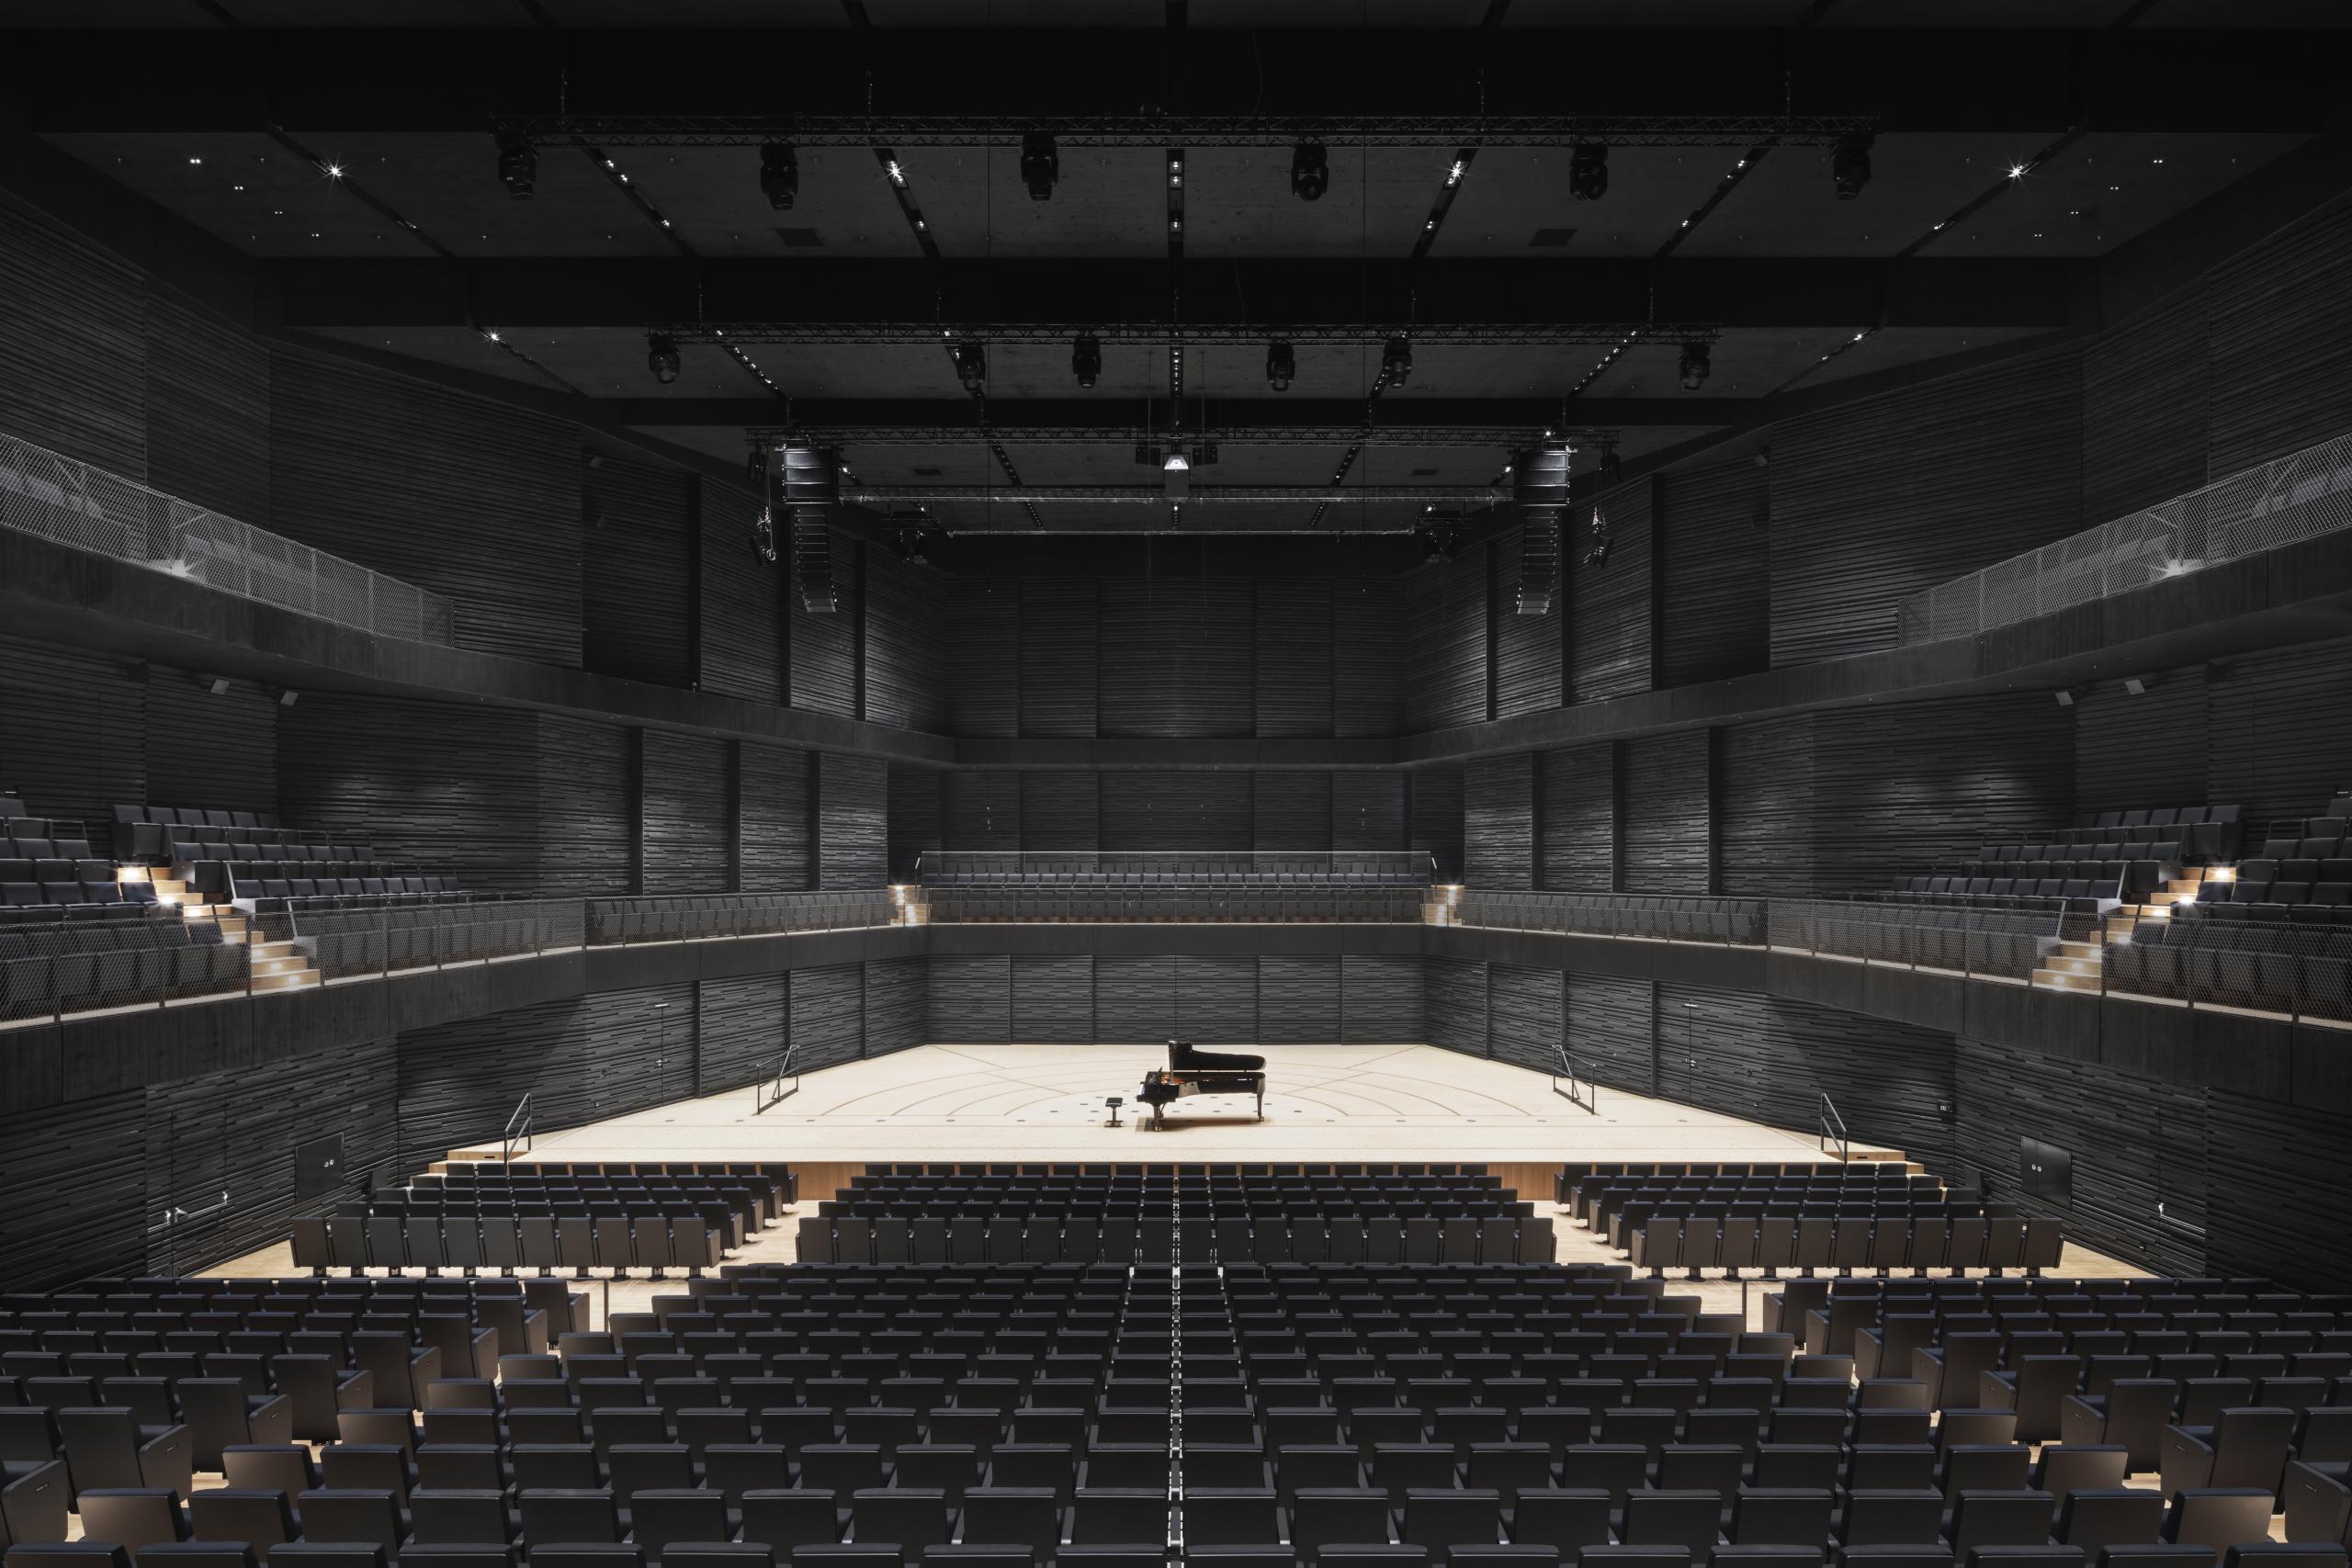 Empty concert hall with black wood paneling, the floor and stage are light wood, black seating, on the stage a grand piano